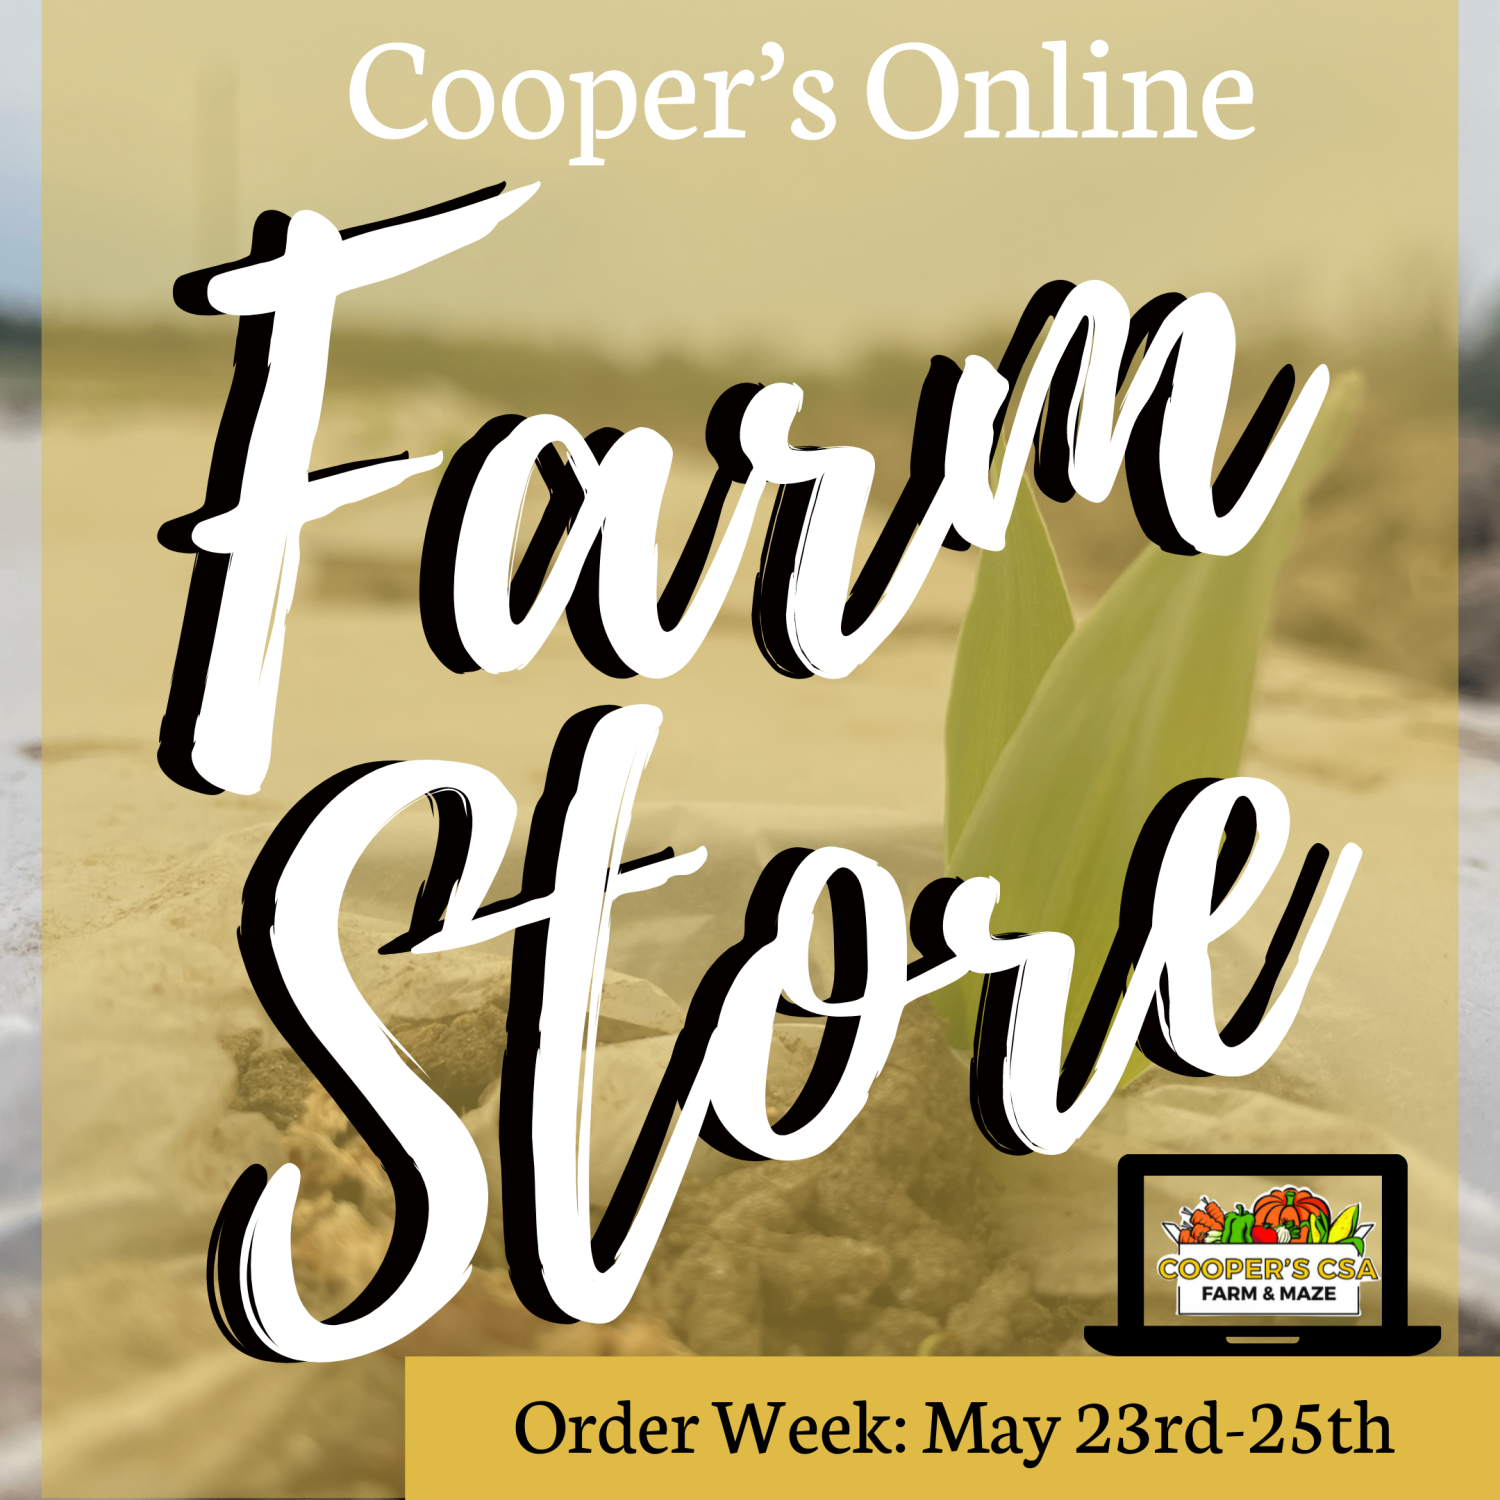 Previous Happening: Coopers CSA Online FarmStore- Order Week May 23rd-25th